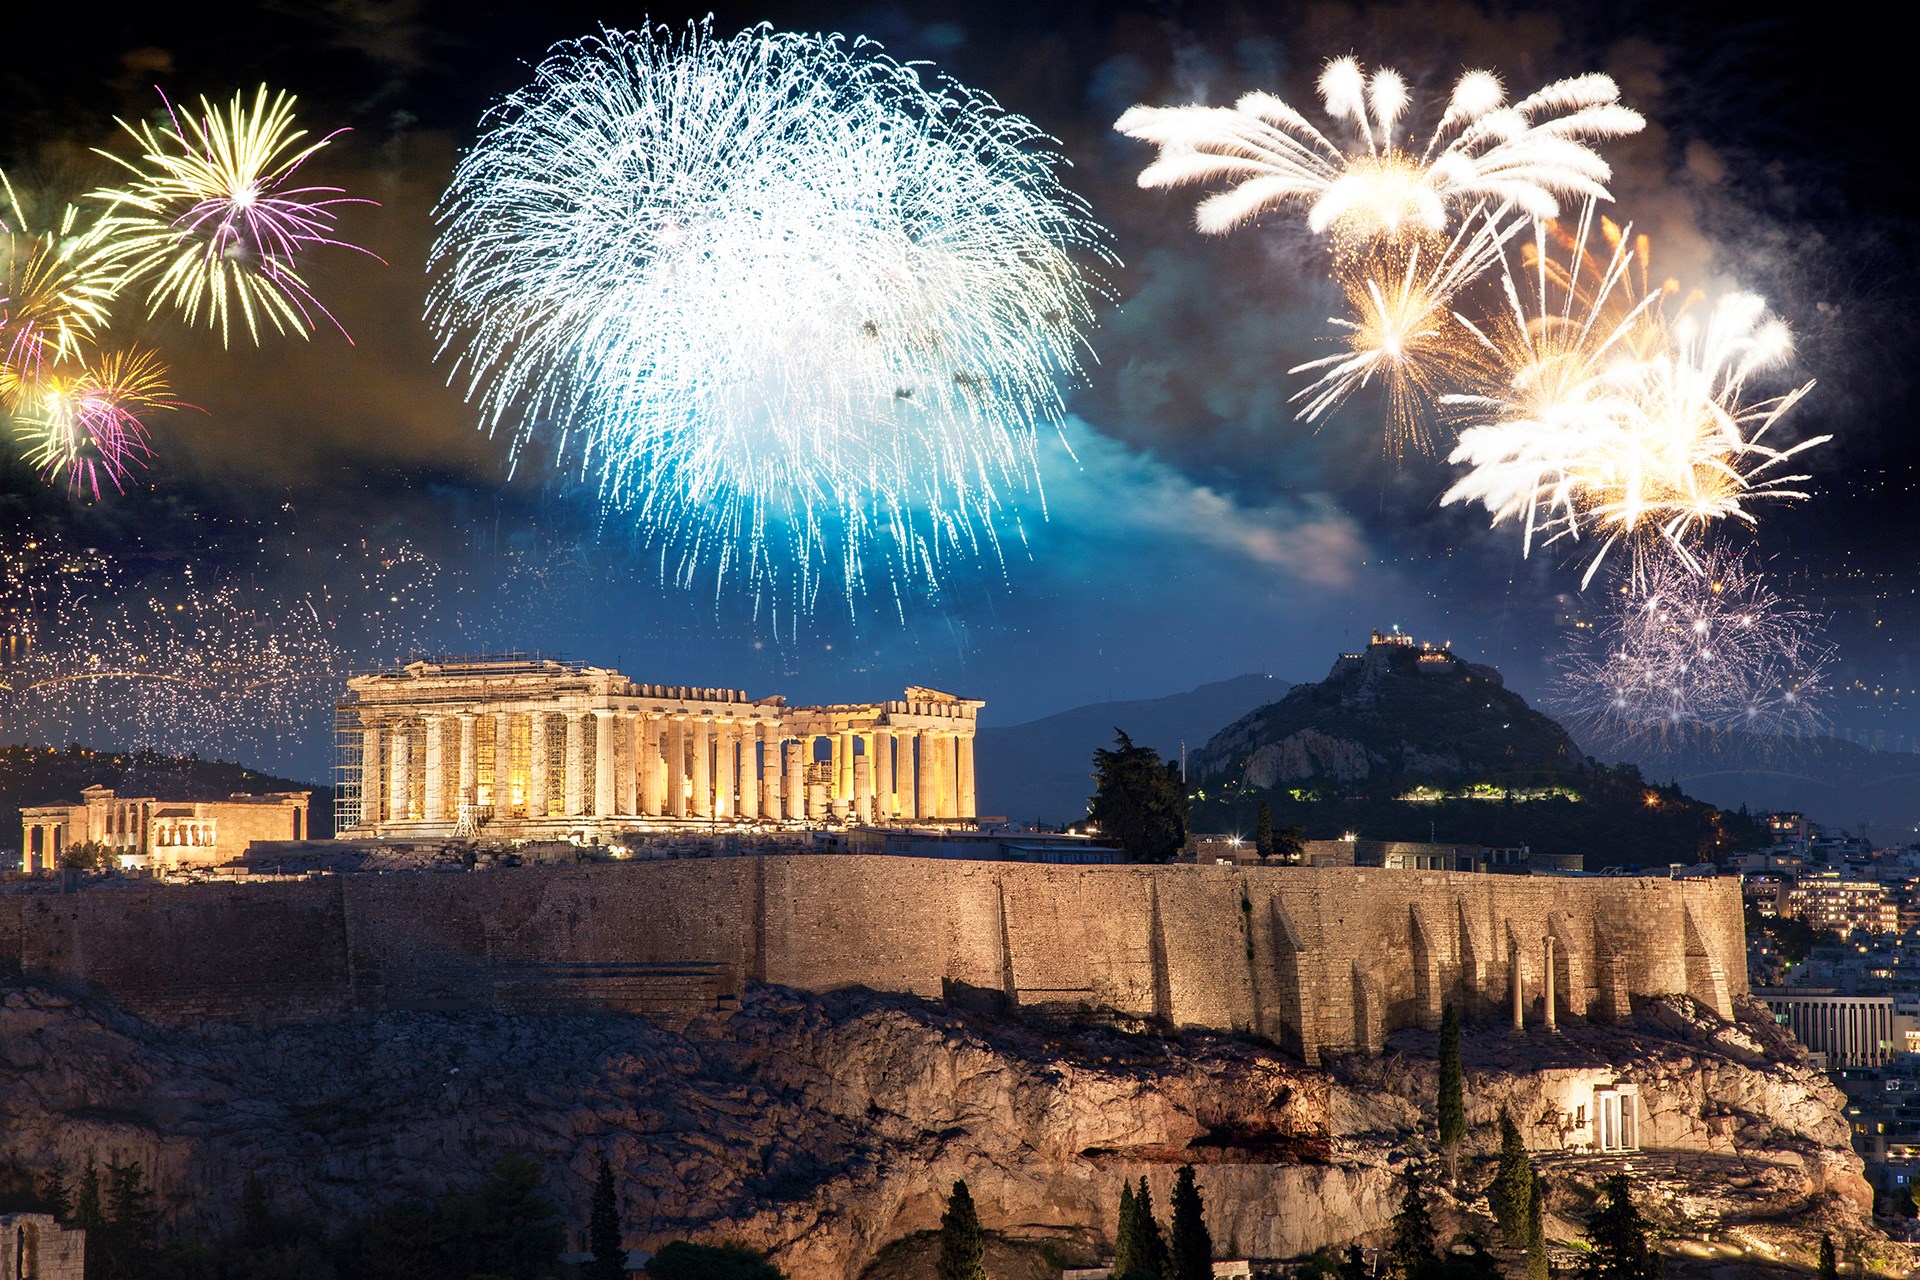 Holidays in the Mediterranean: Ring in the new year with these traditional New Year’s celebrations